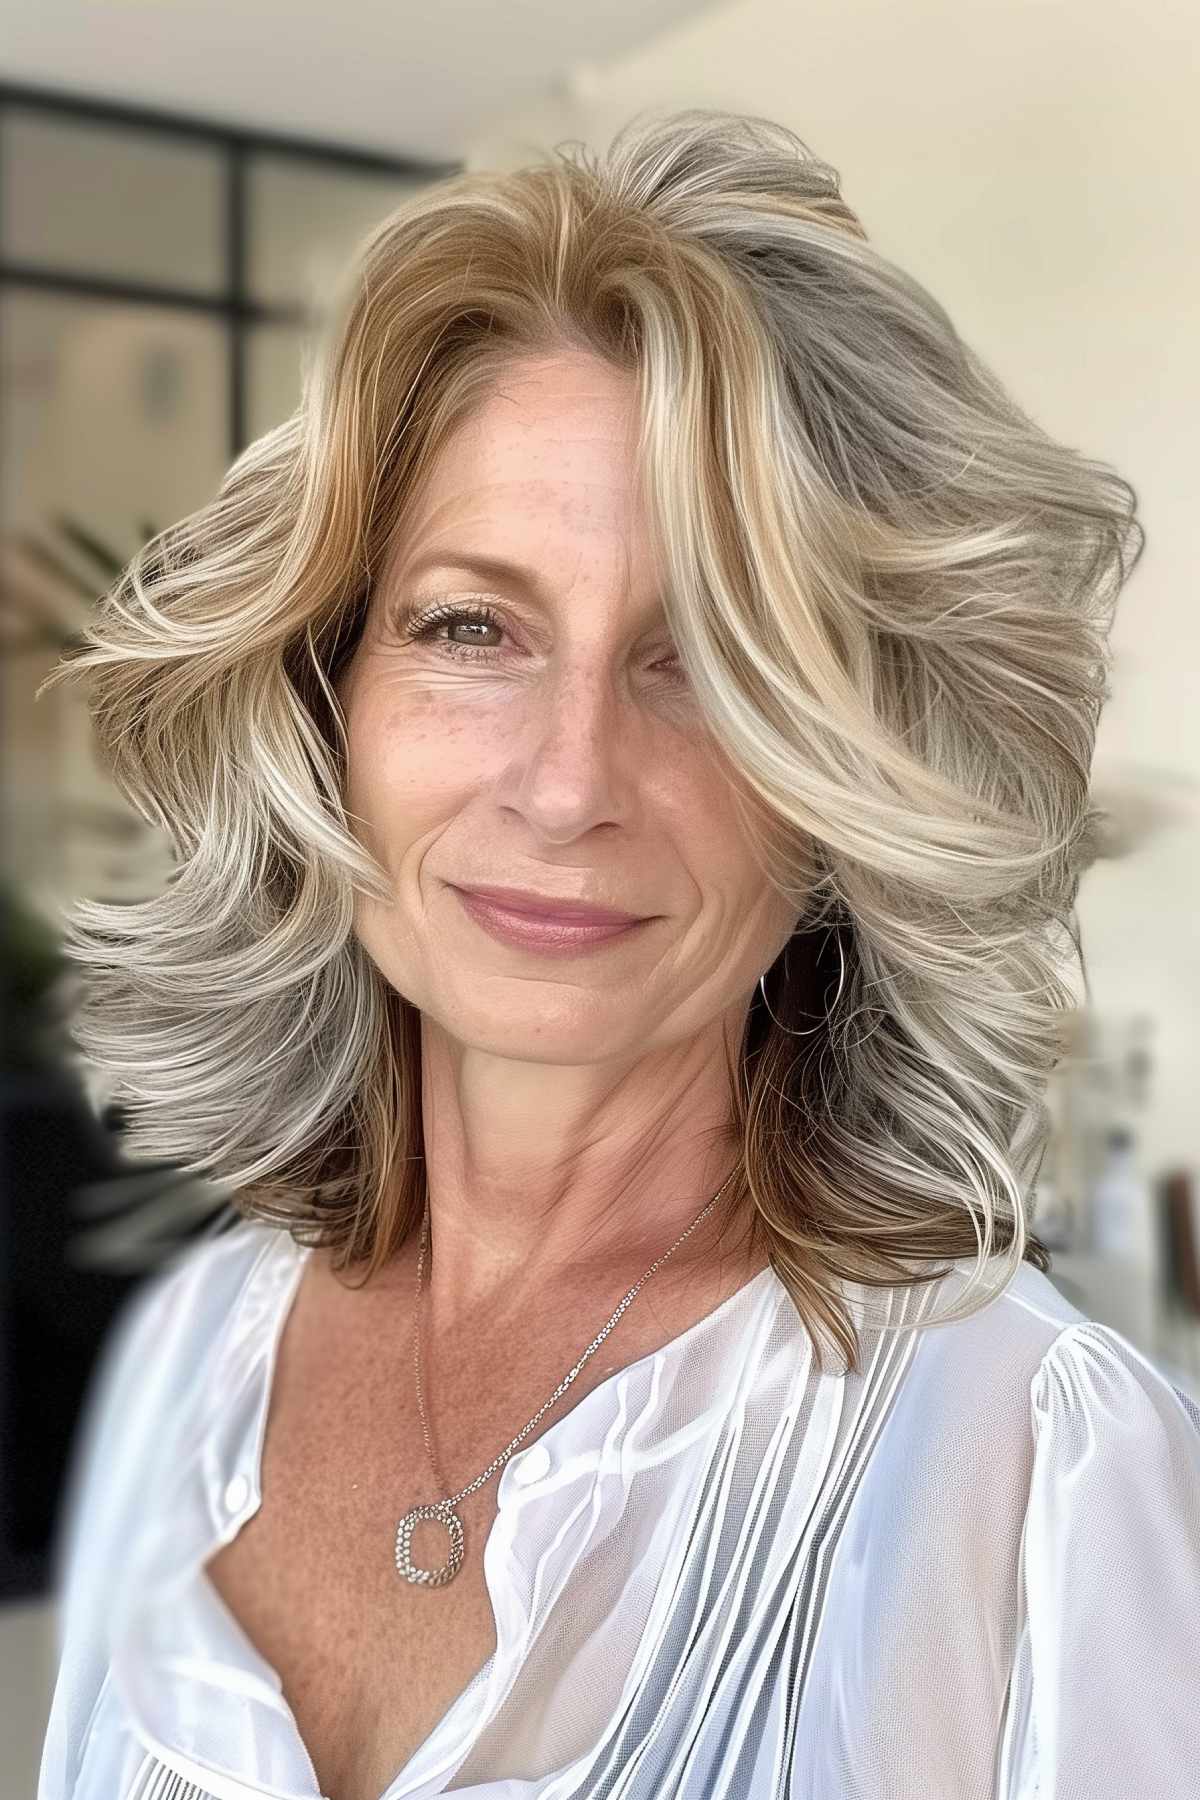 Wavy layered haircut with ash blonde highlights on a mature woman, styled to add volume and movement.